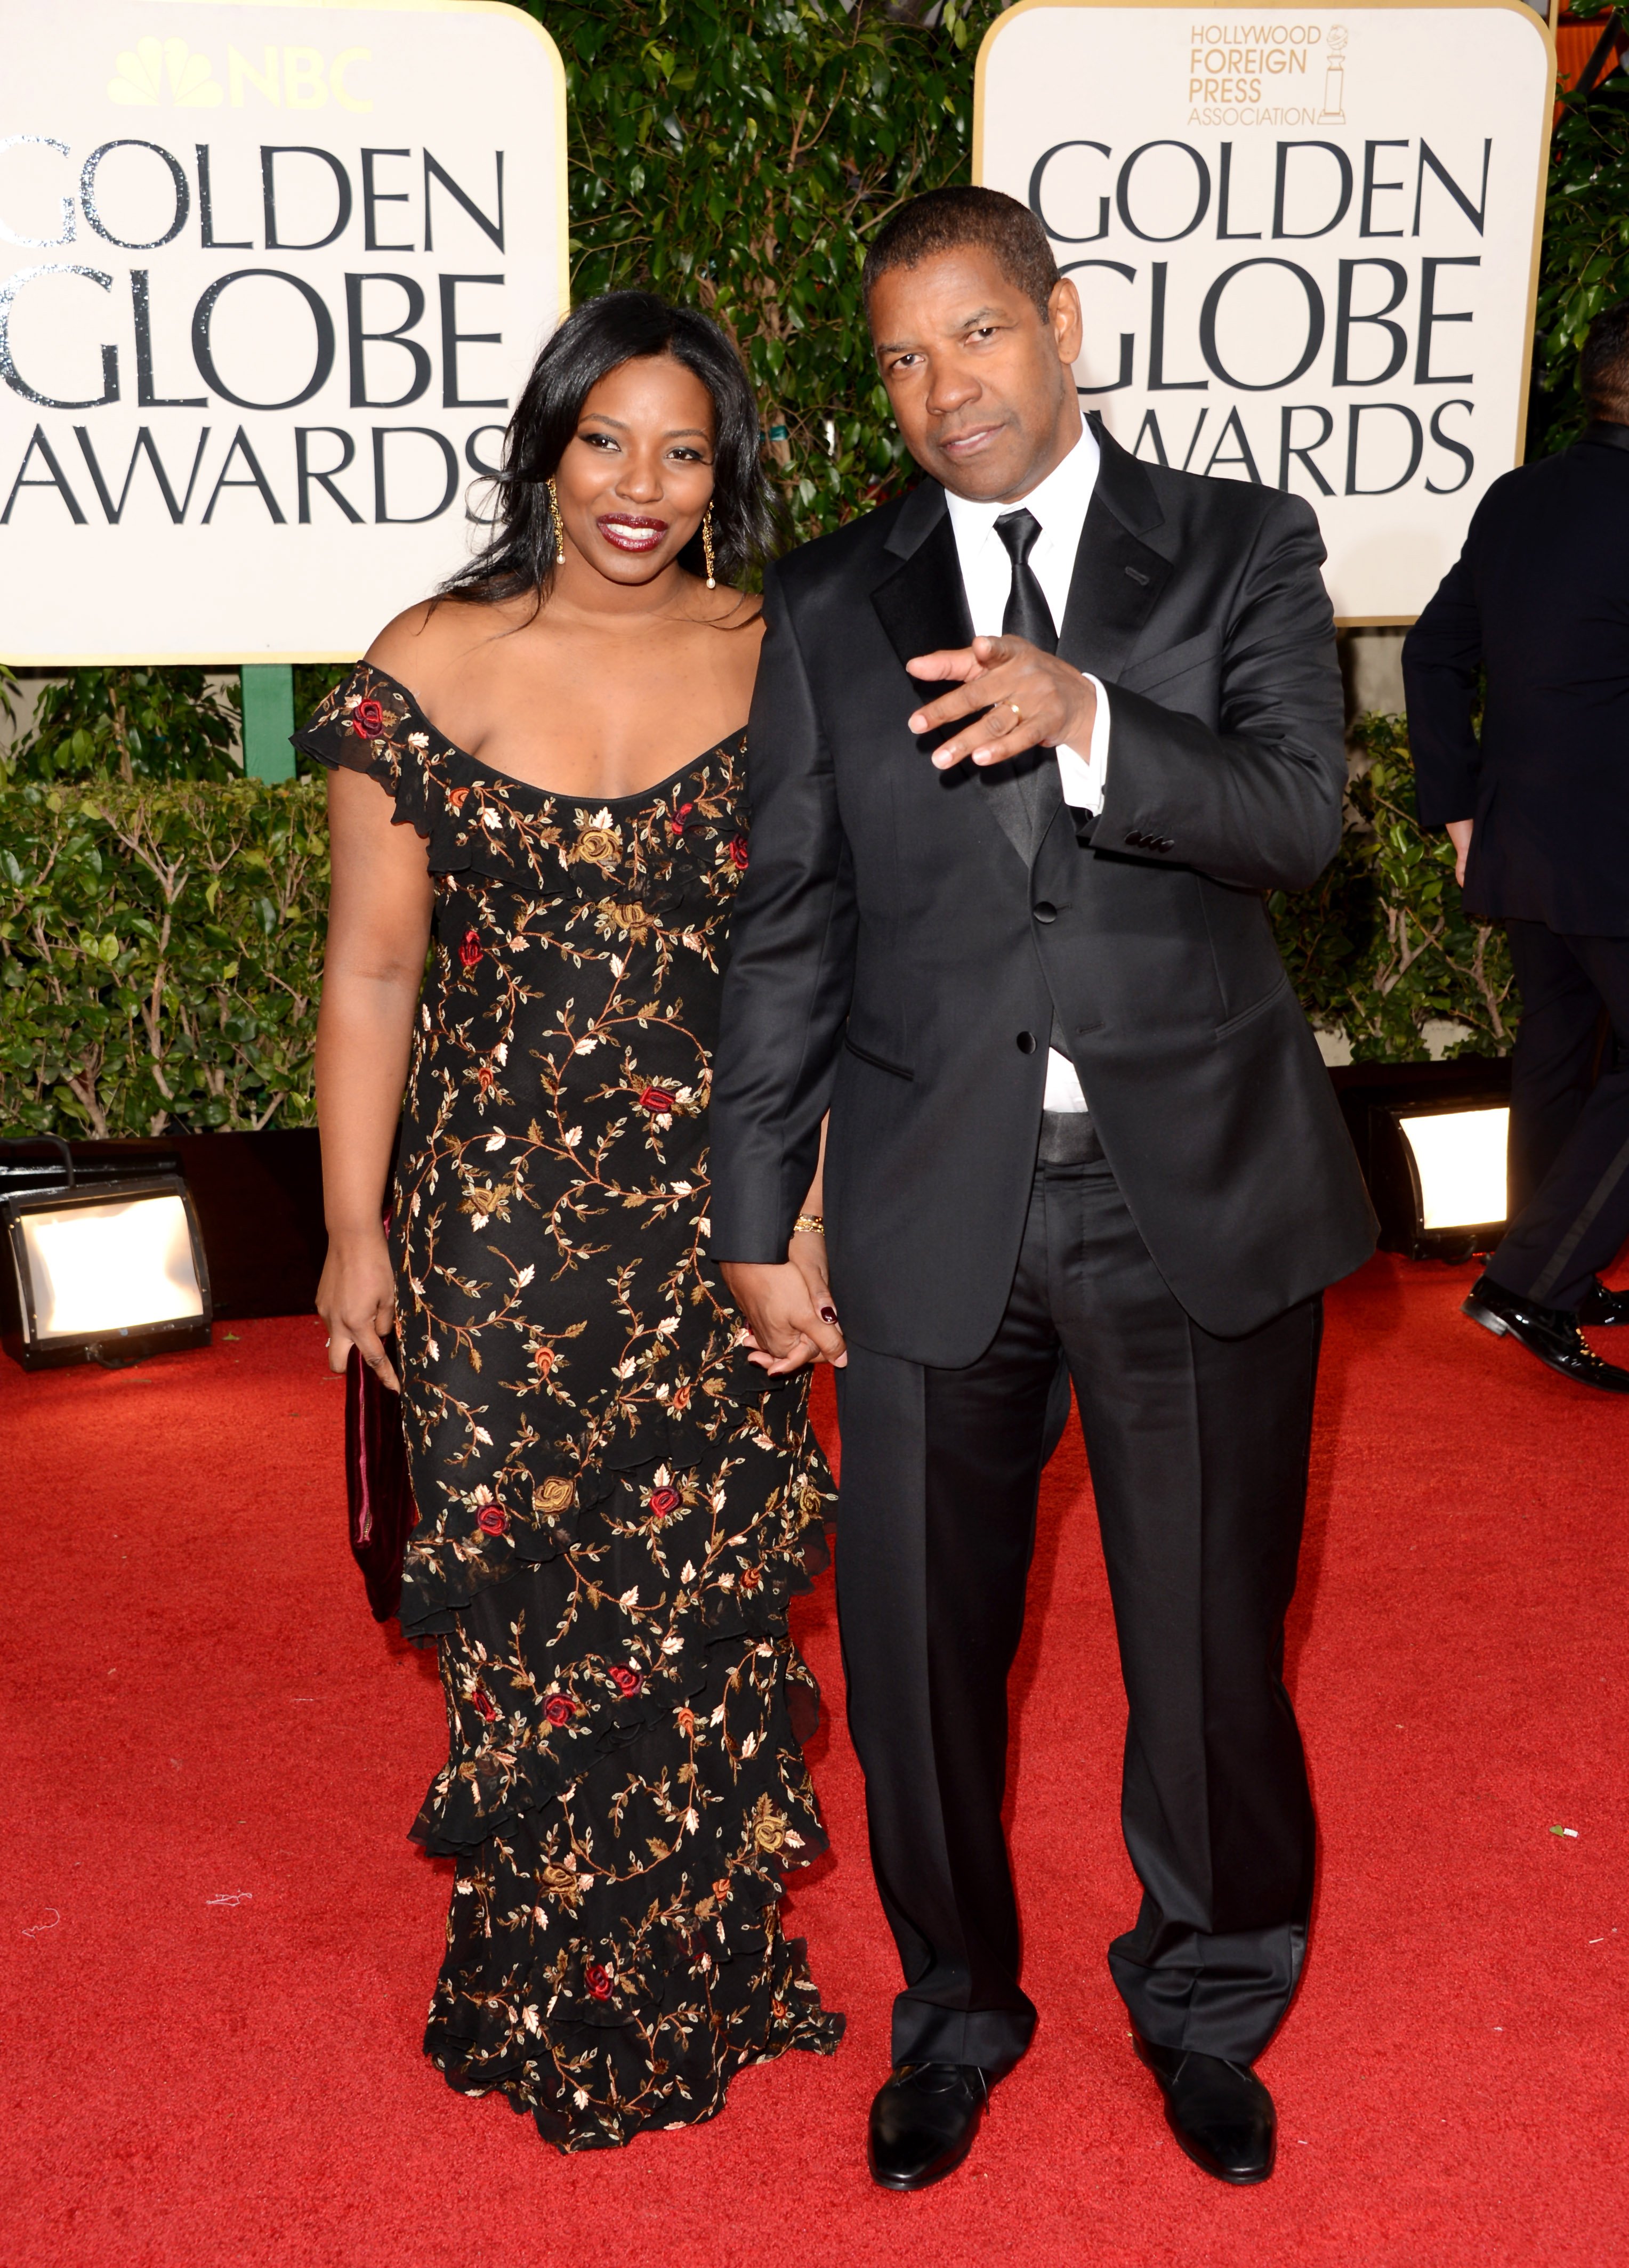 Denzel Washington (R) and Olivia Washington arrive at the 70th Annual Golden Globe Awards held at The Beverly Hilton Hotel on January 13, 2013  | Photo: GettyImages